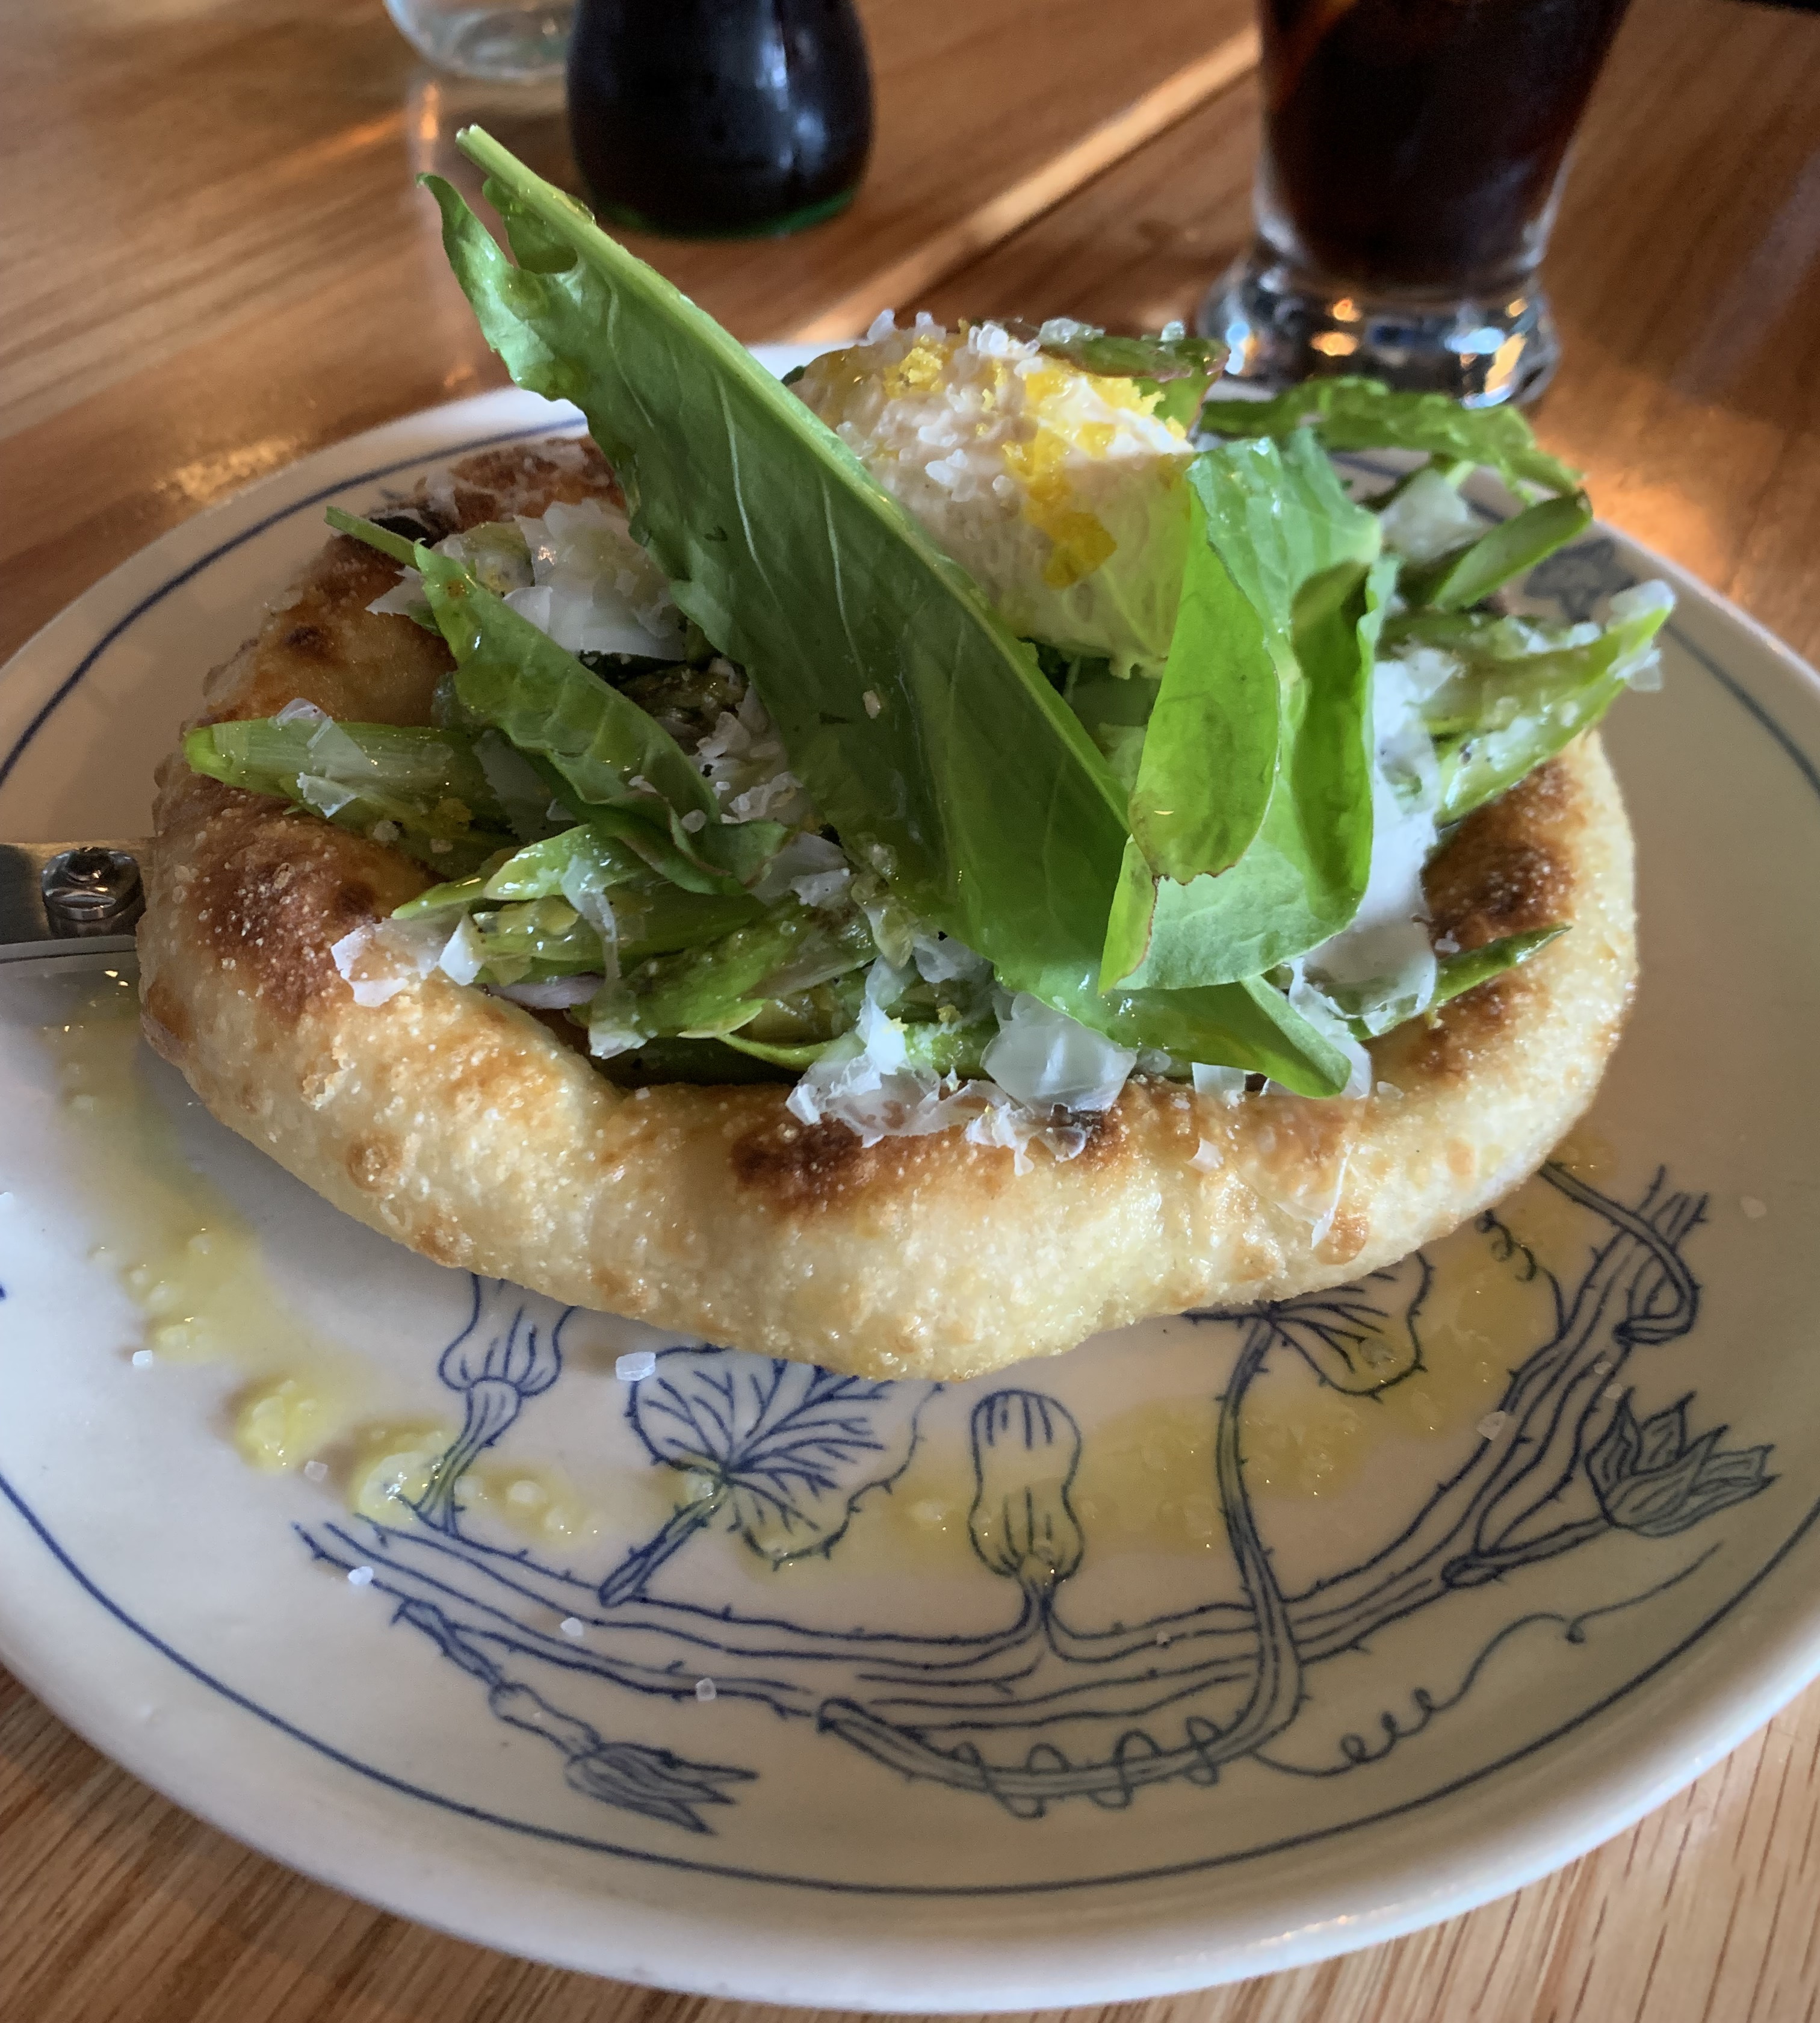 Flatbread with a ton of greens on top, a thin ring of butter around it, and a quenelle of yellow-ish custard